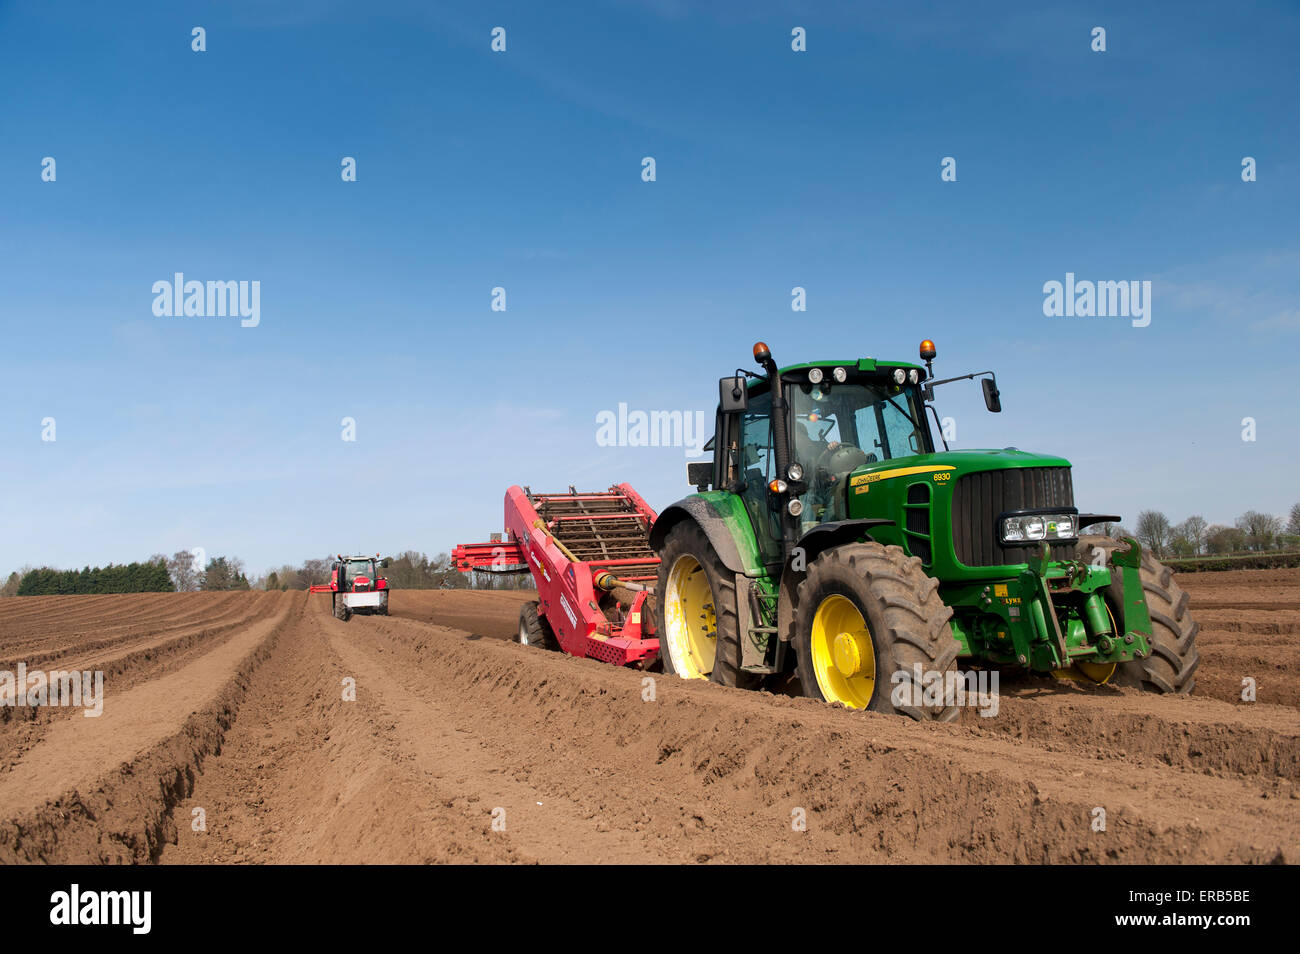 Preparing potato seed bed, using Grimme stone removing machine pulled by a John Deere 6930, Yorkshire, UK. Stock Photo